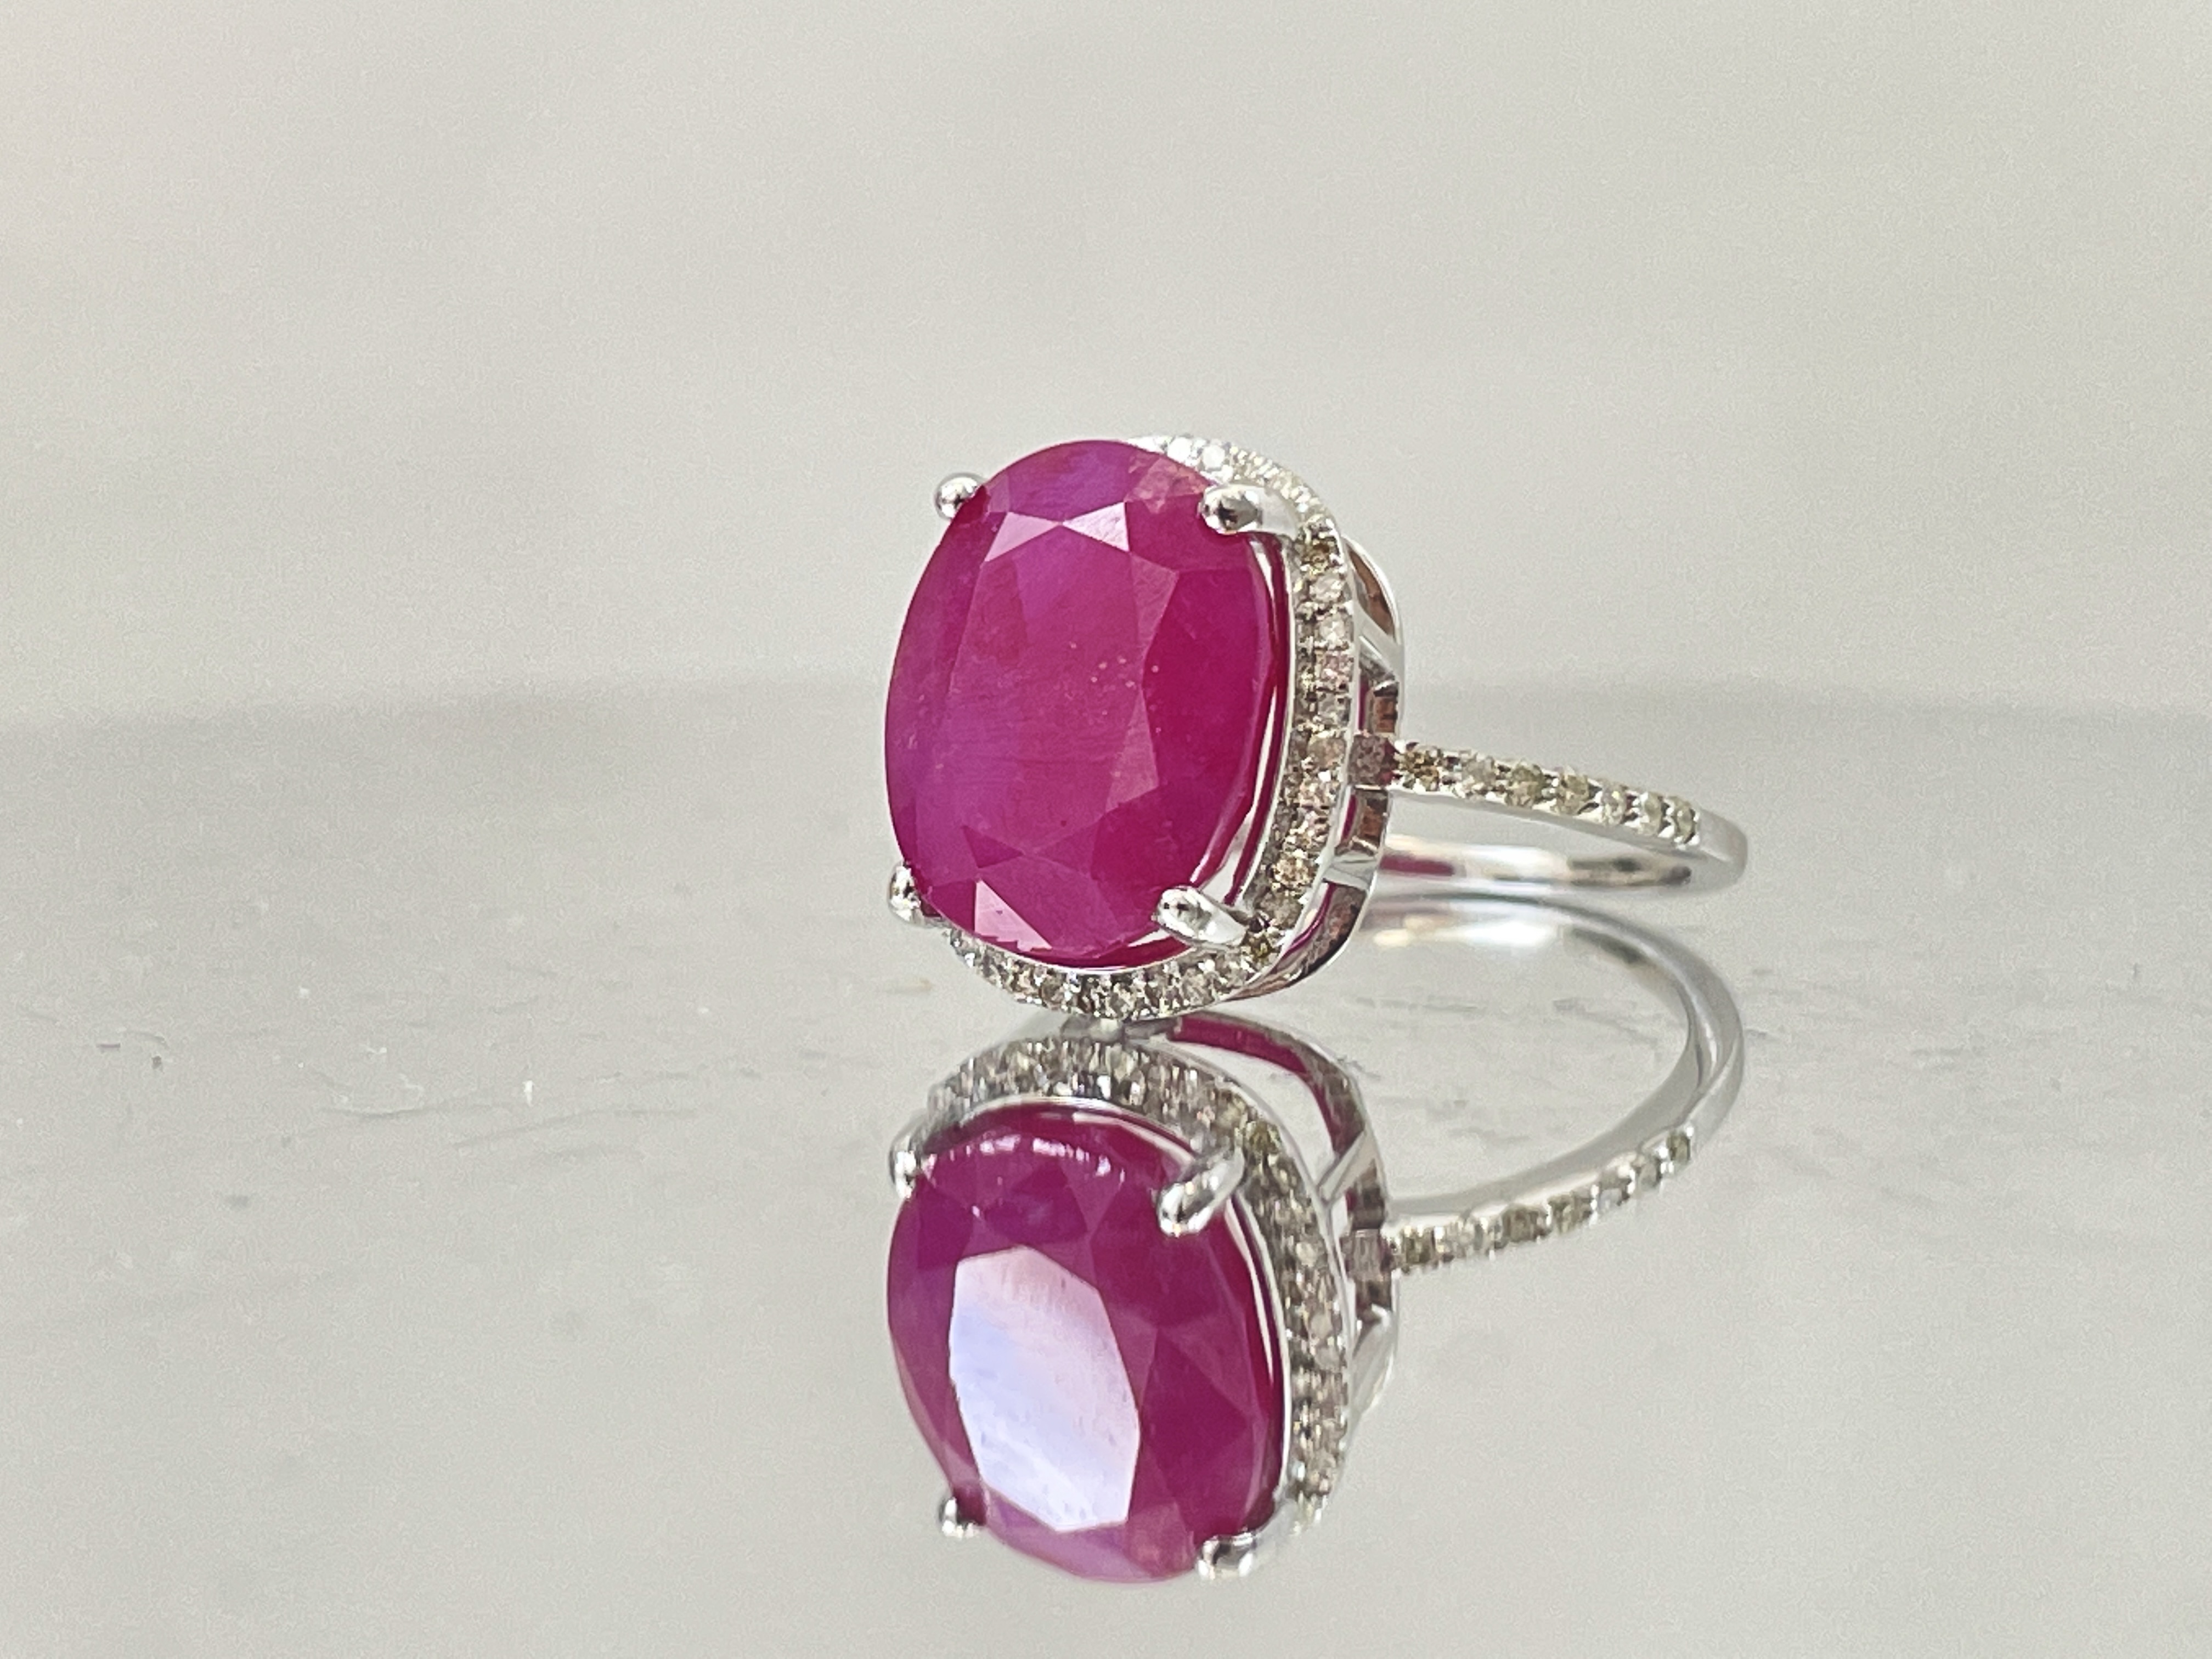 Natural Burma Ruby 9.16 Ct With Natural Diamonds & 18kGold - Image 4 of 7